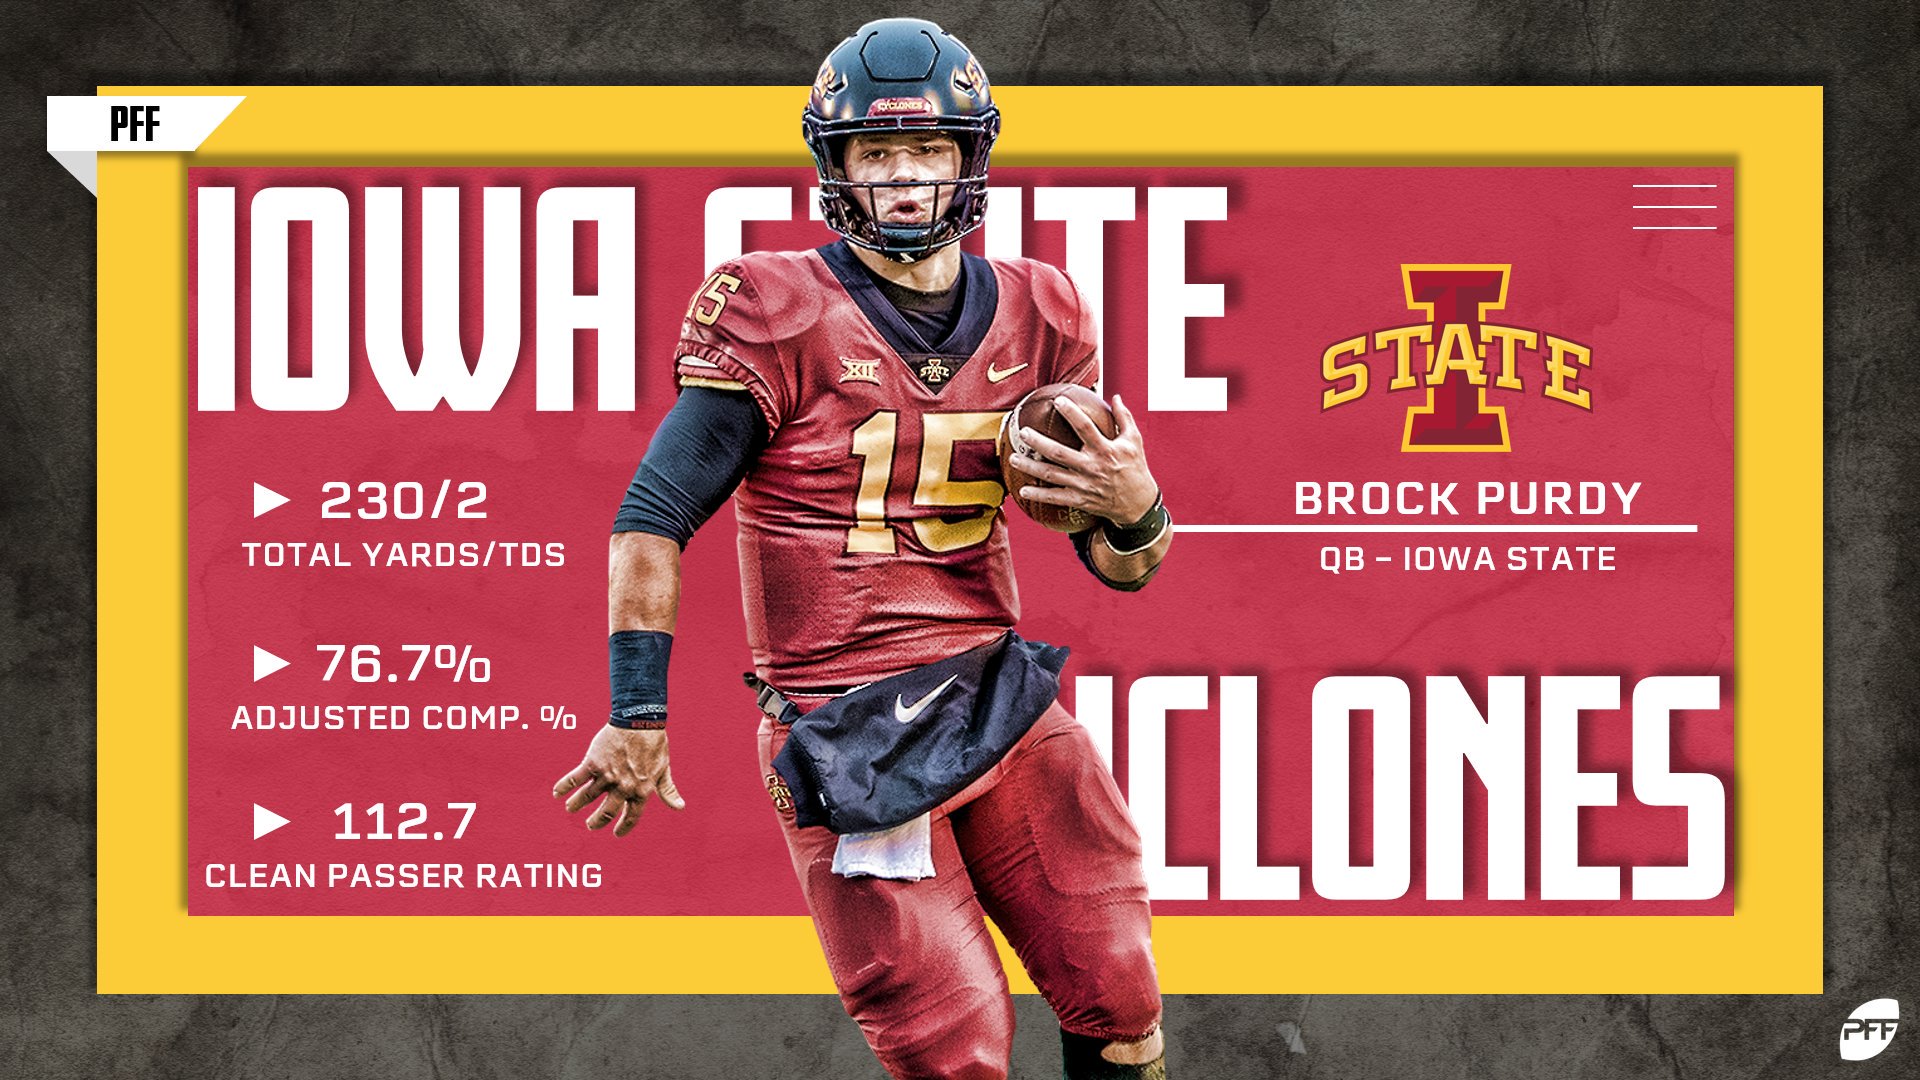 PFF Draft Purdy put forth another good performance in an Iowa State victory!